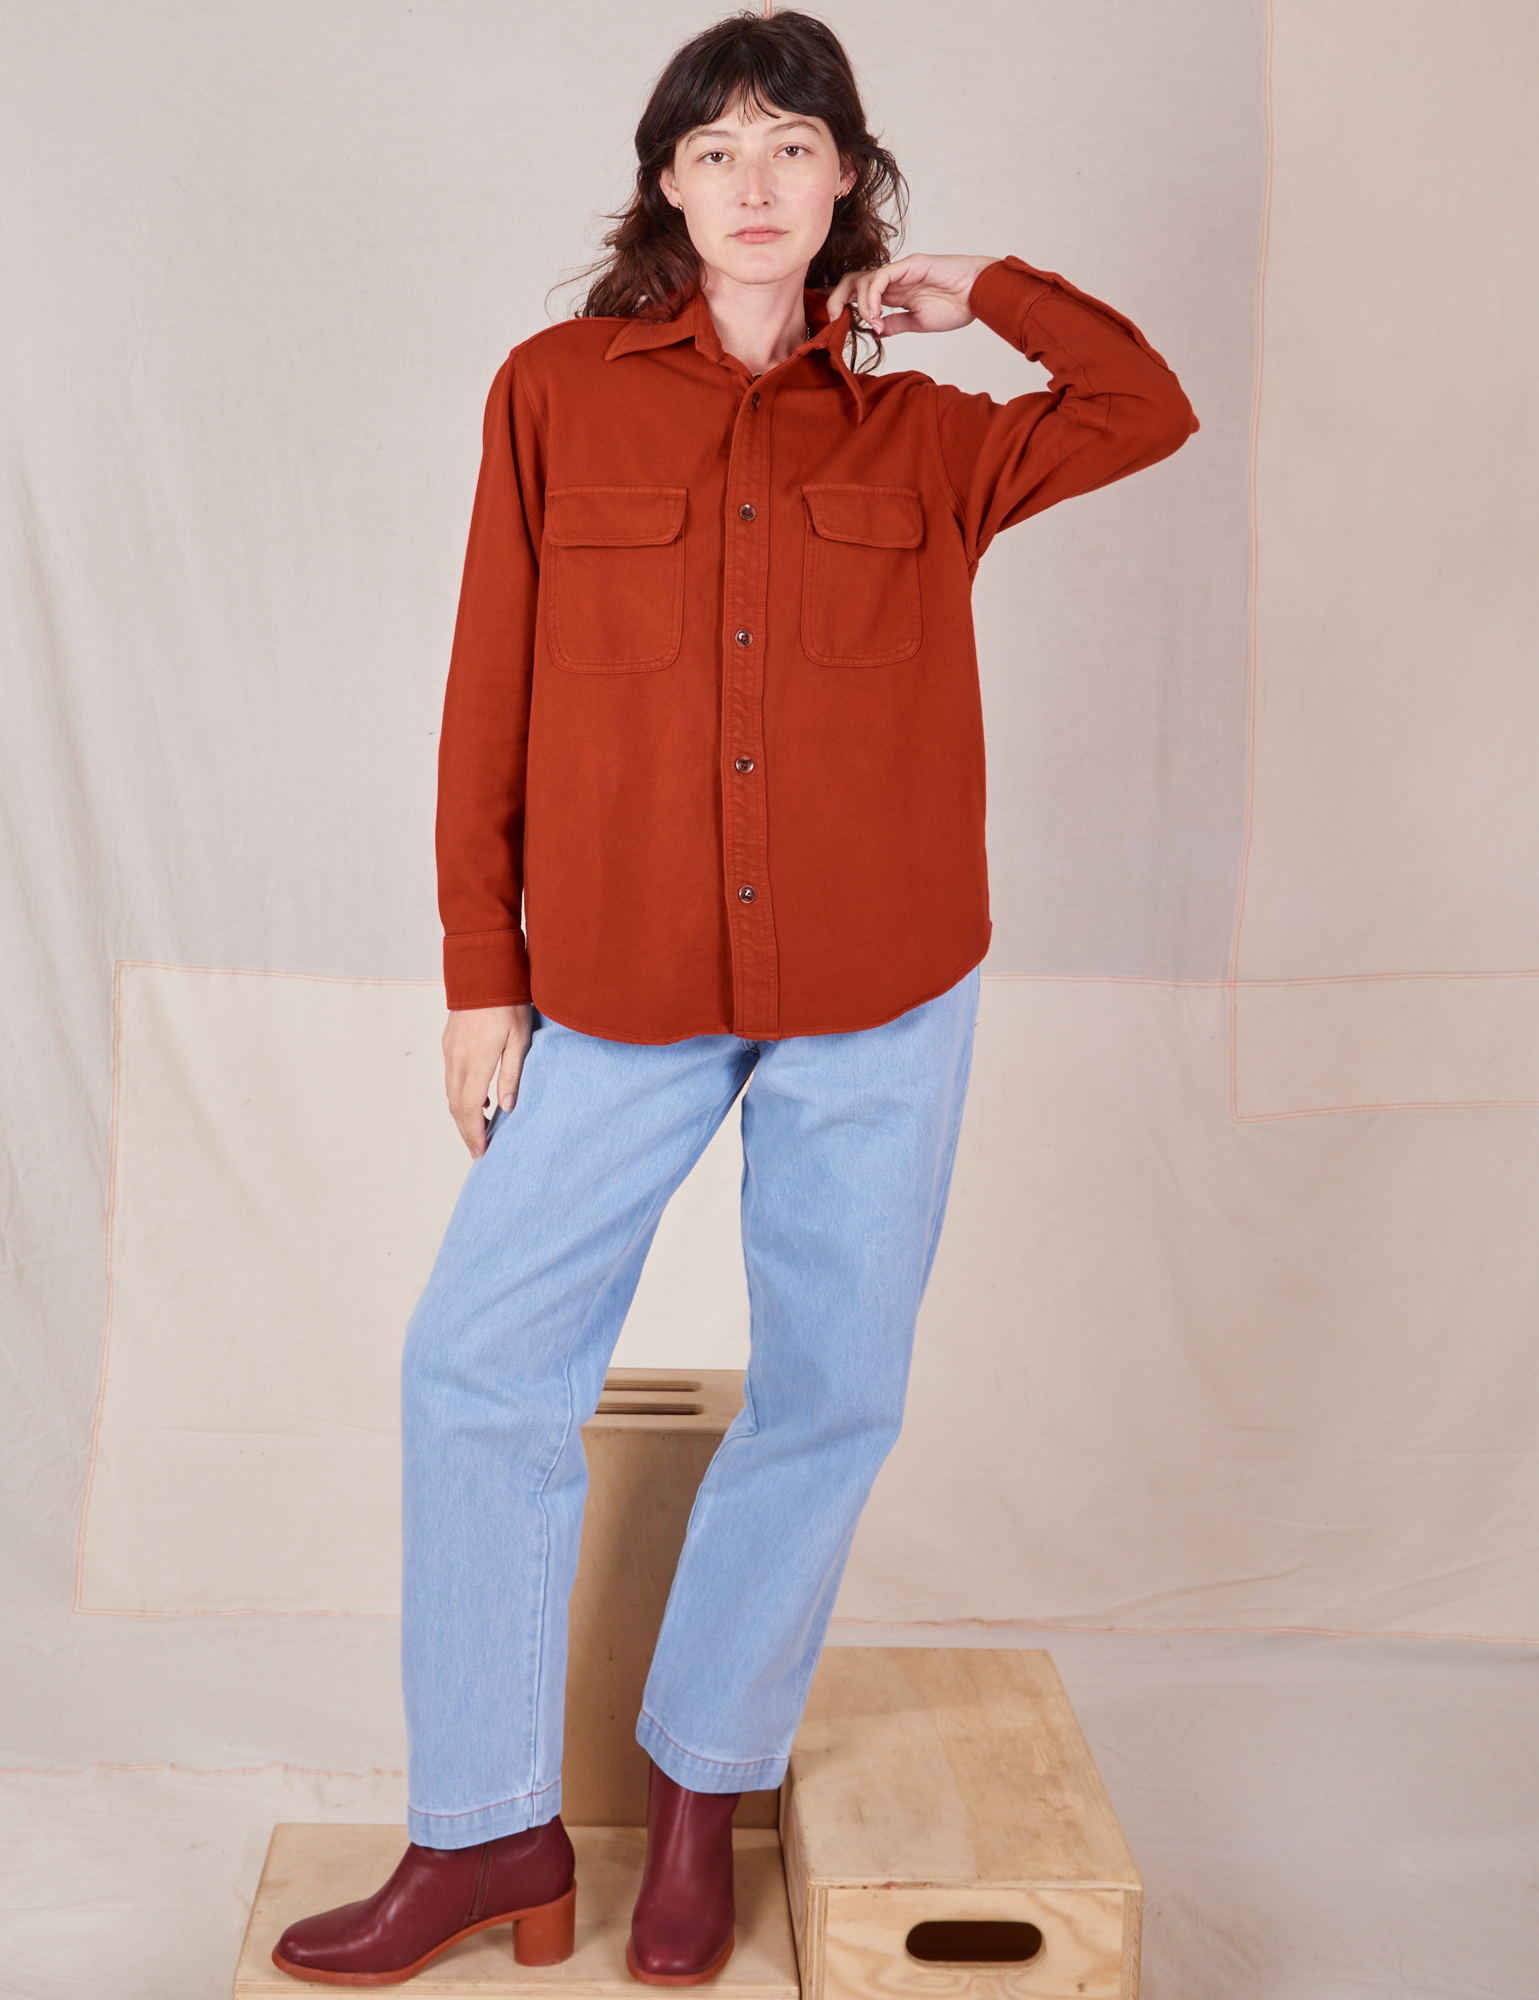 Alex is 5&#39;8&quot; and wearing P Flannel Overshirt in Paprika paired with light wash Trouser Jeans